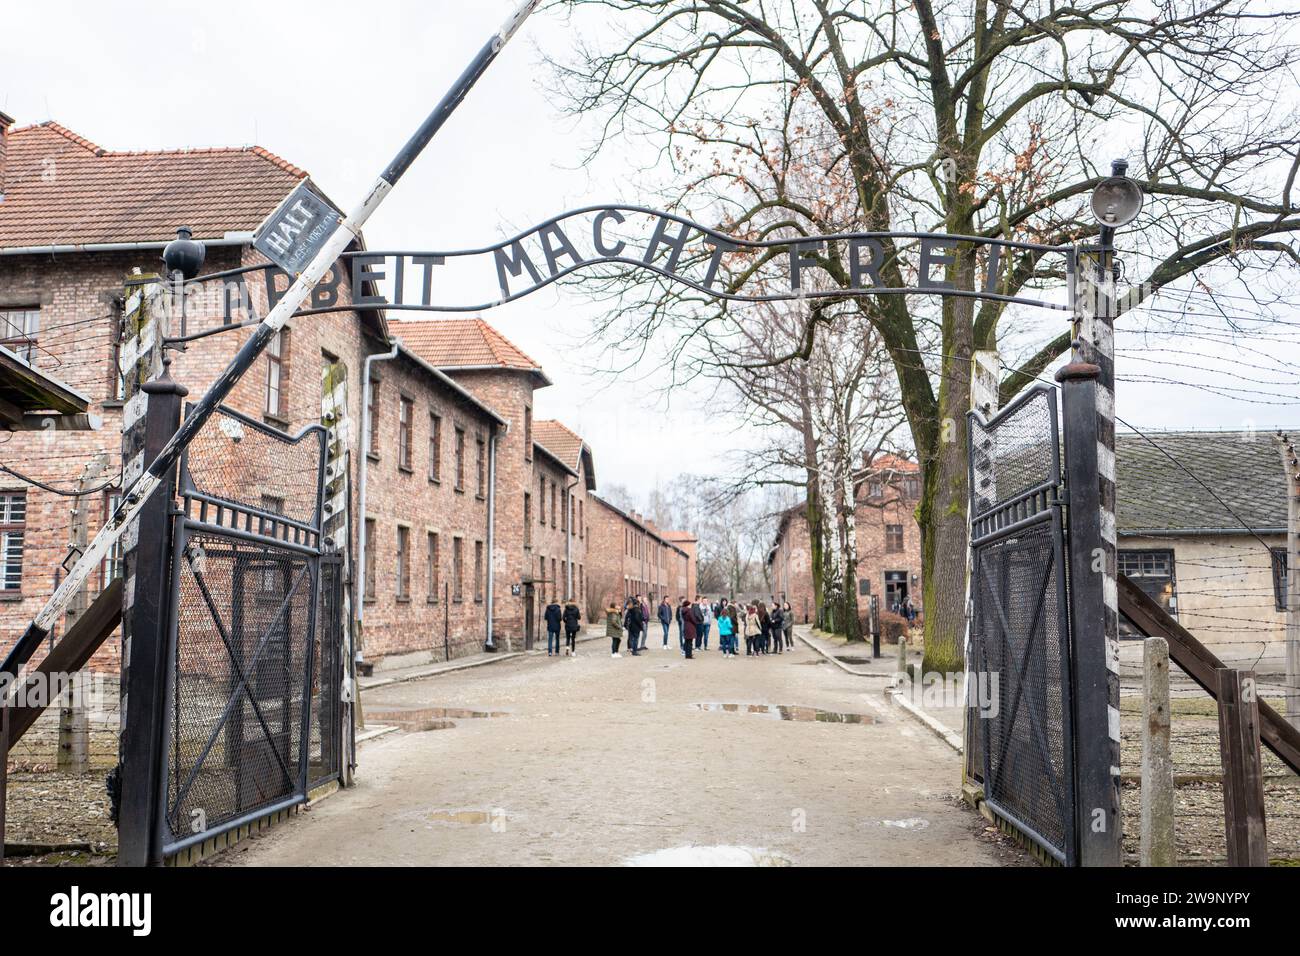 The motto above the gate to Auschwitz concentration camp, 'Arbeit macht frei' (Work Sets You Free). Stock Photo